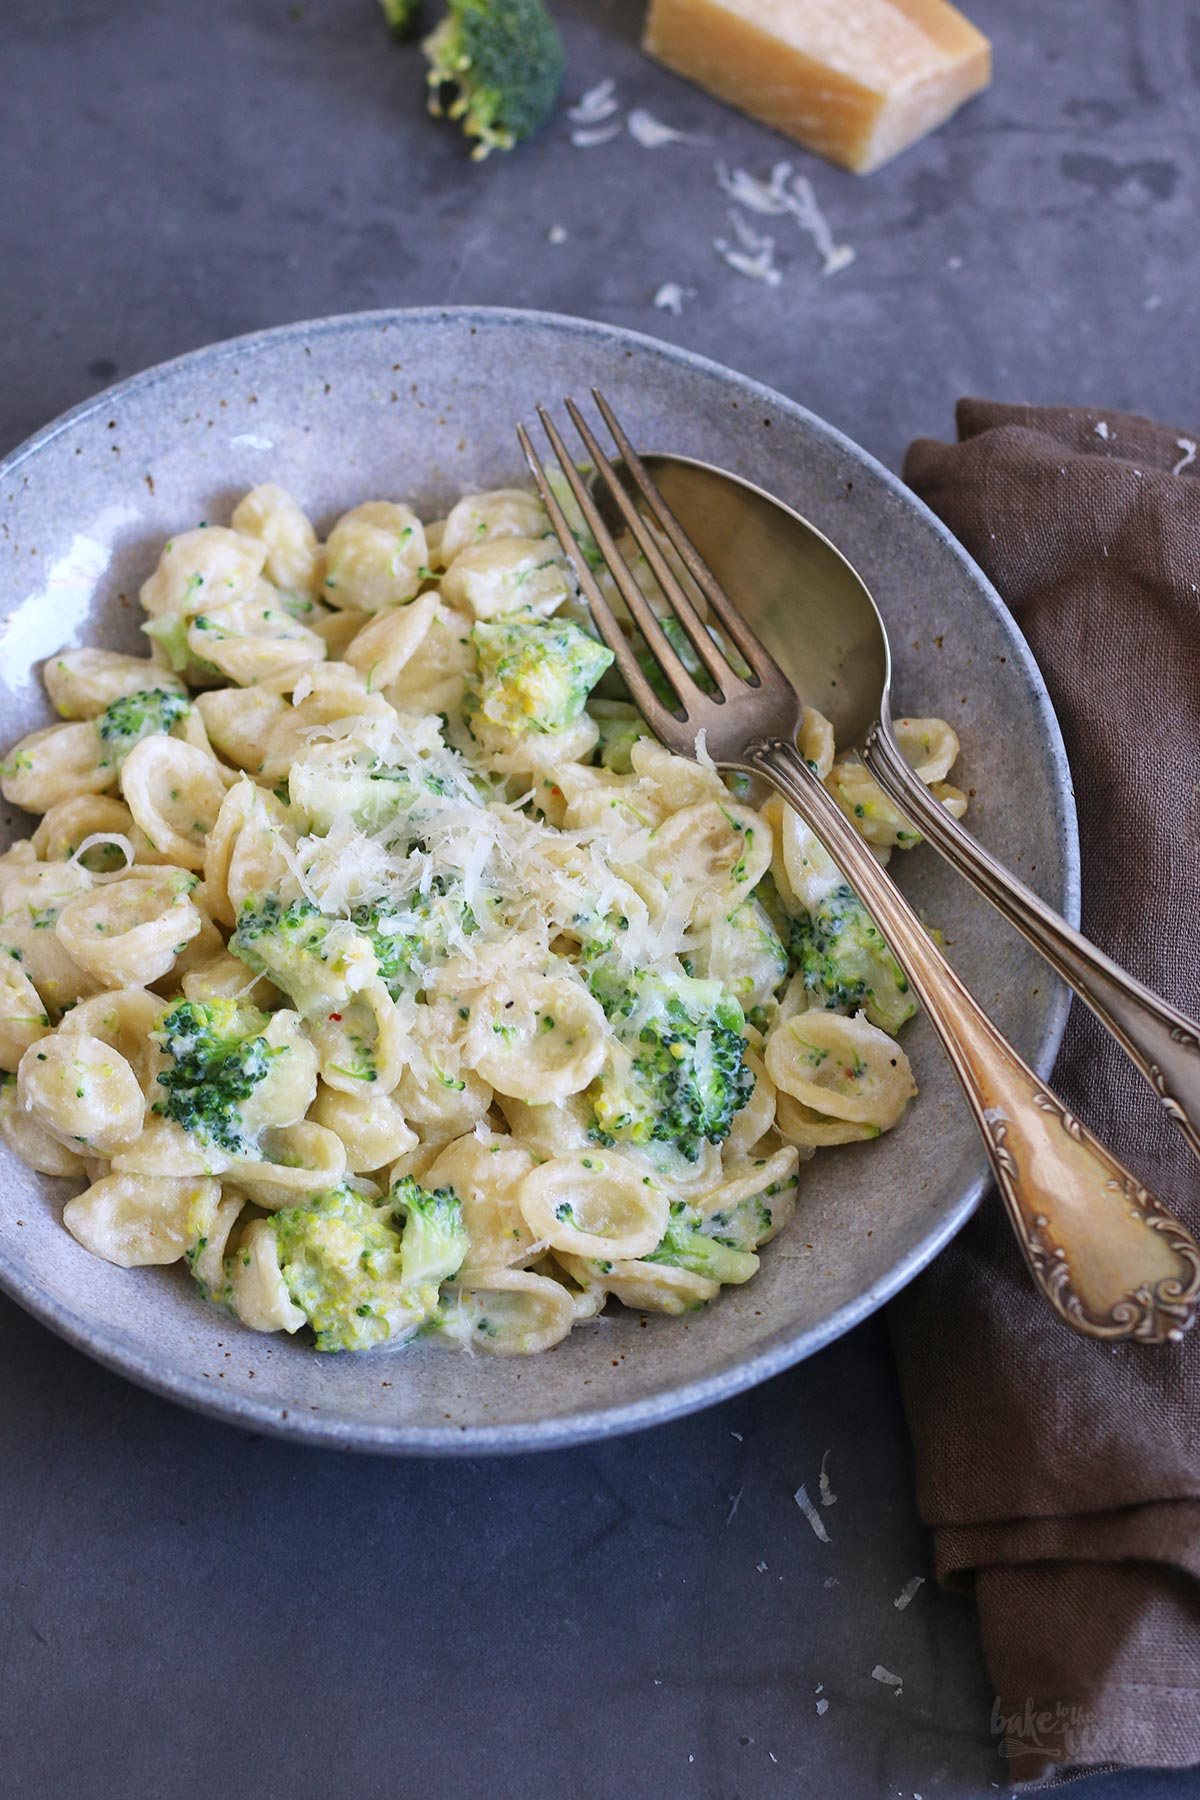 One-Pot Pasta with Creamy Ricotta Lemon Sauce and Broccoli | Bake to the roots